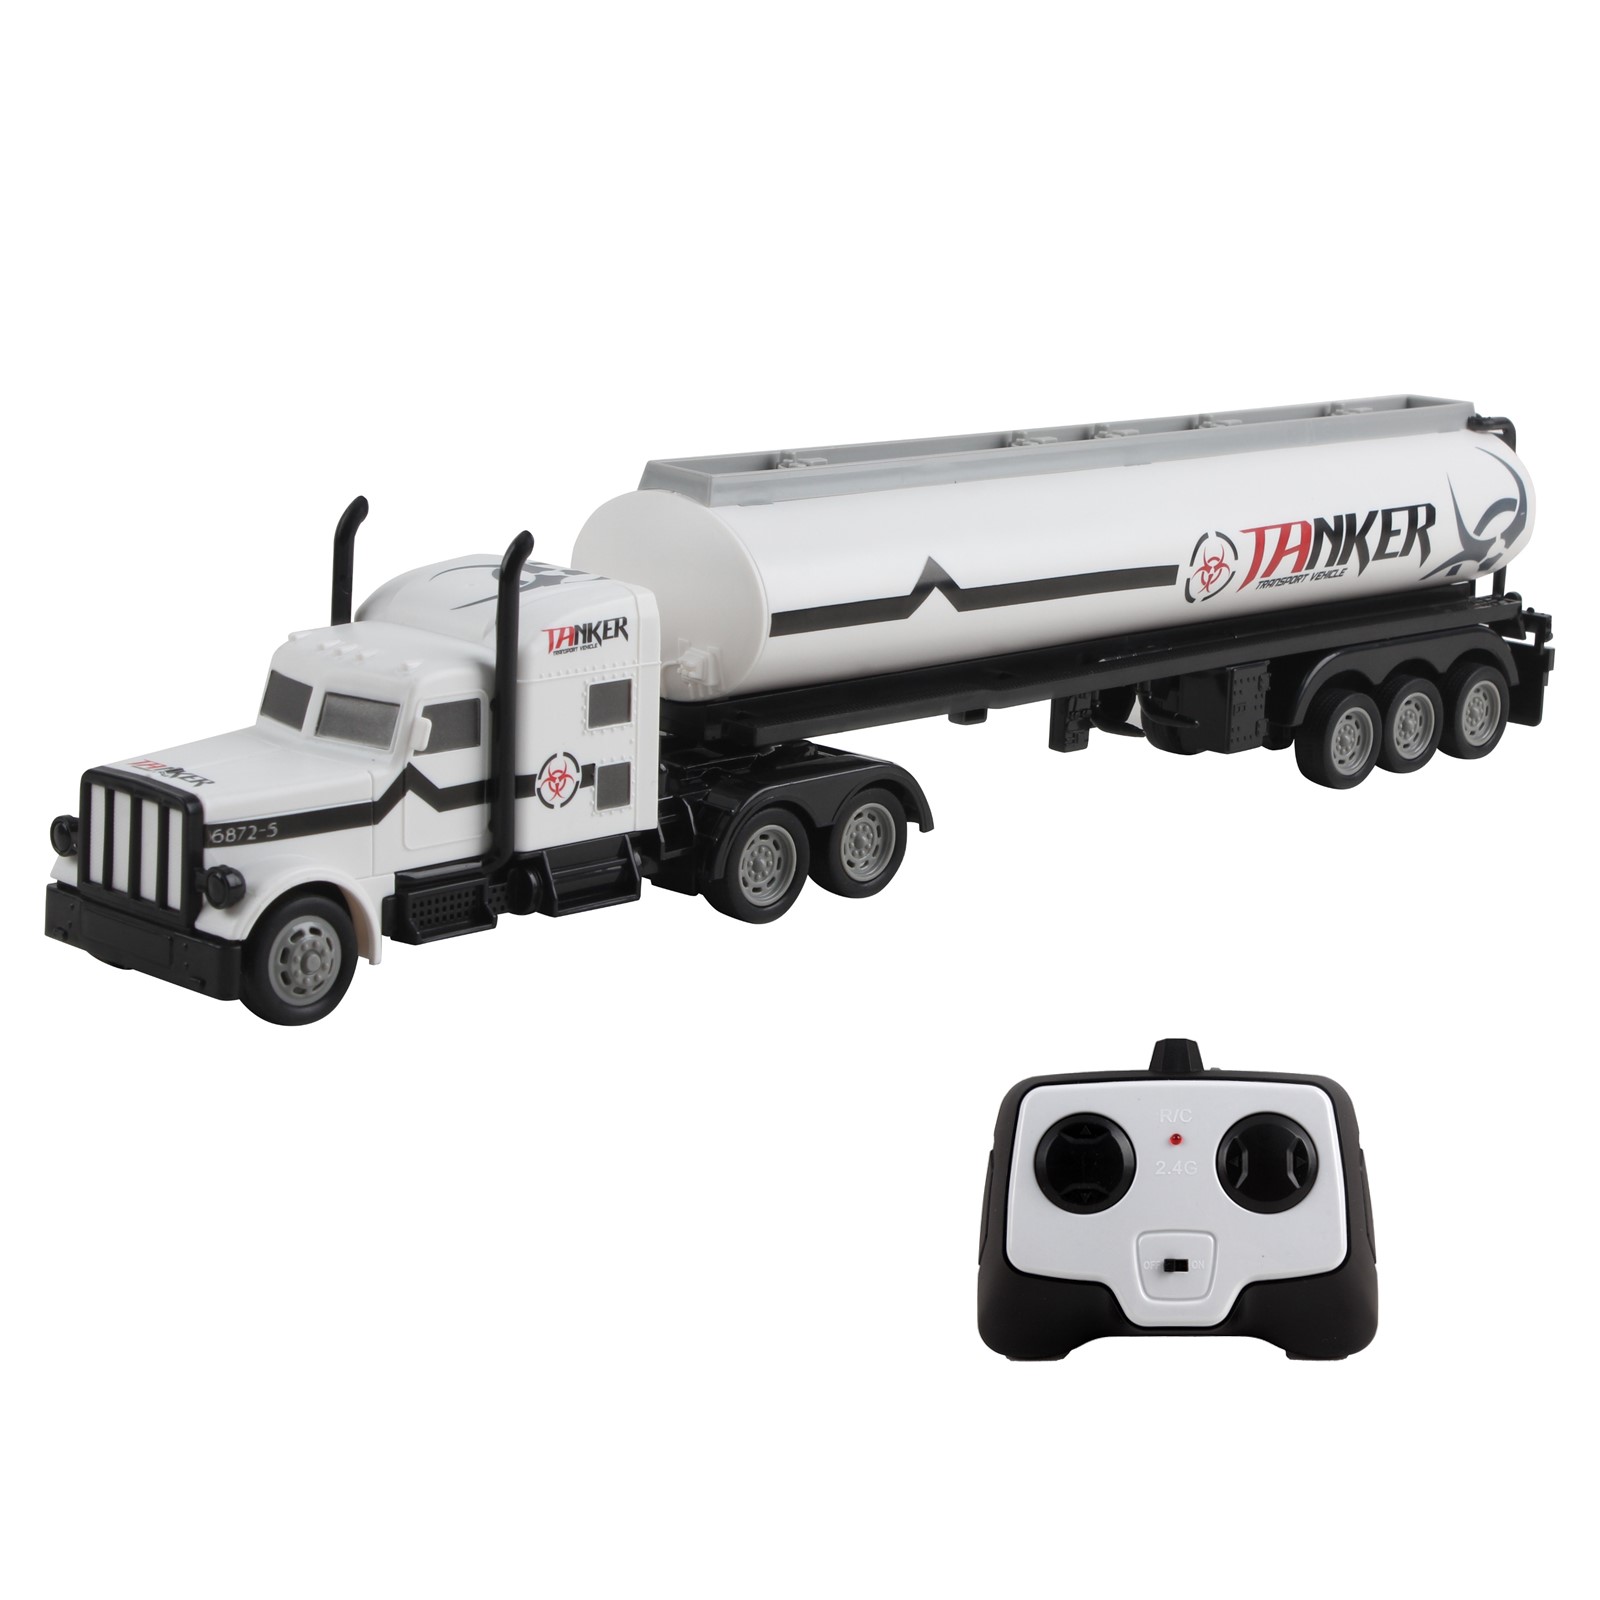 Vokodo RC Semi Truck And Trailer 18 Inch 2.4Ghz Fast Speed 1:16 Scale Electric Fuel Oil Hauler Rechargeable Battery Included Remote Control Kids Big Rig Toy Tanker Car Great Gift For Children Boy Girl